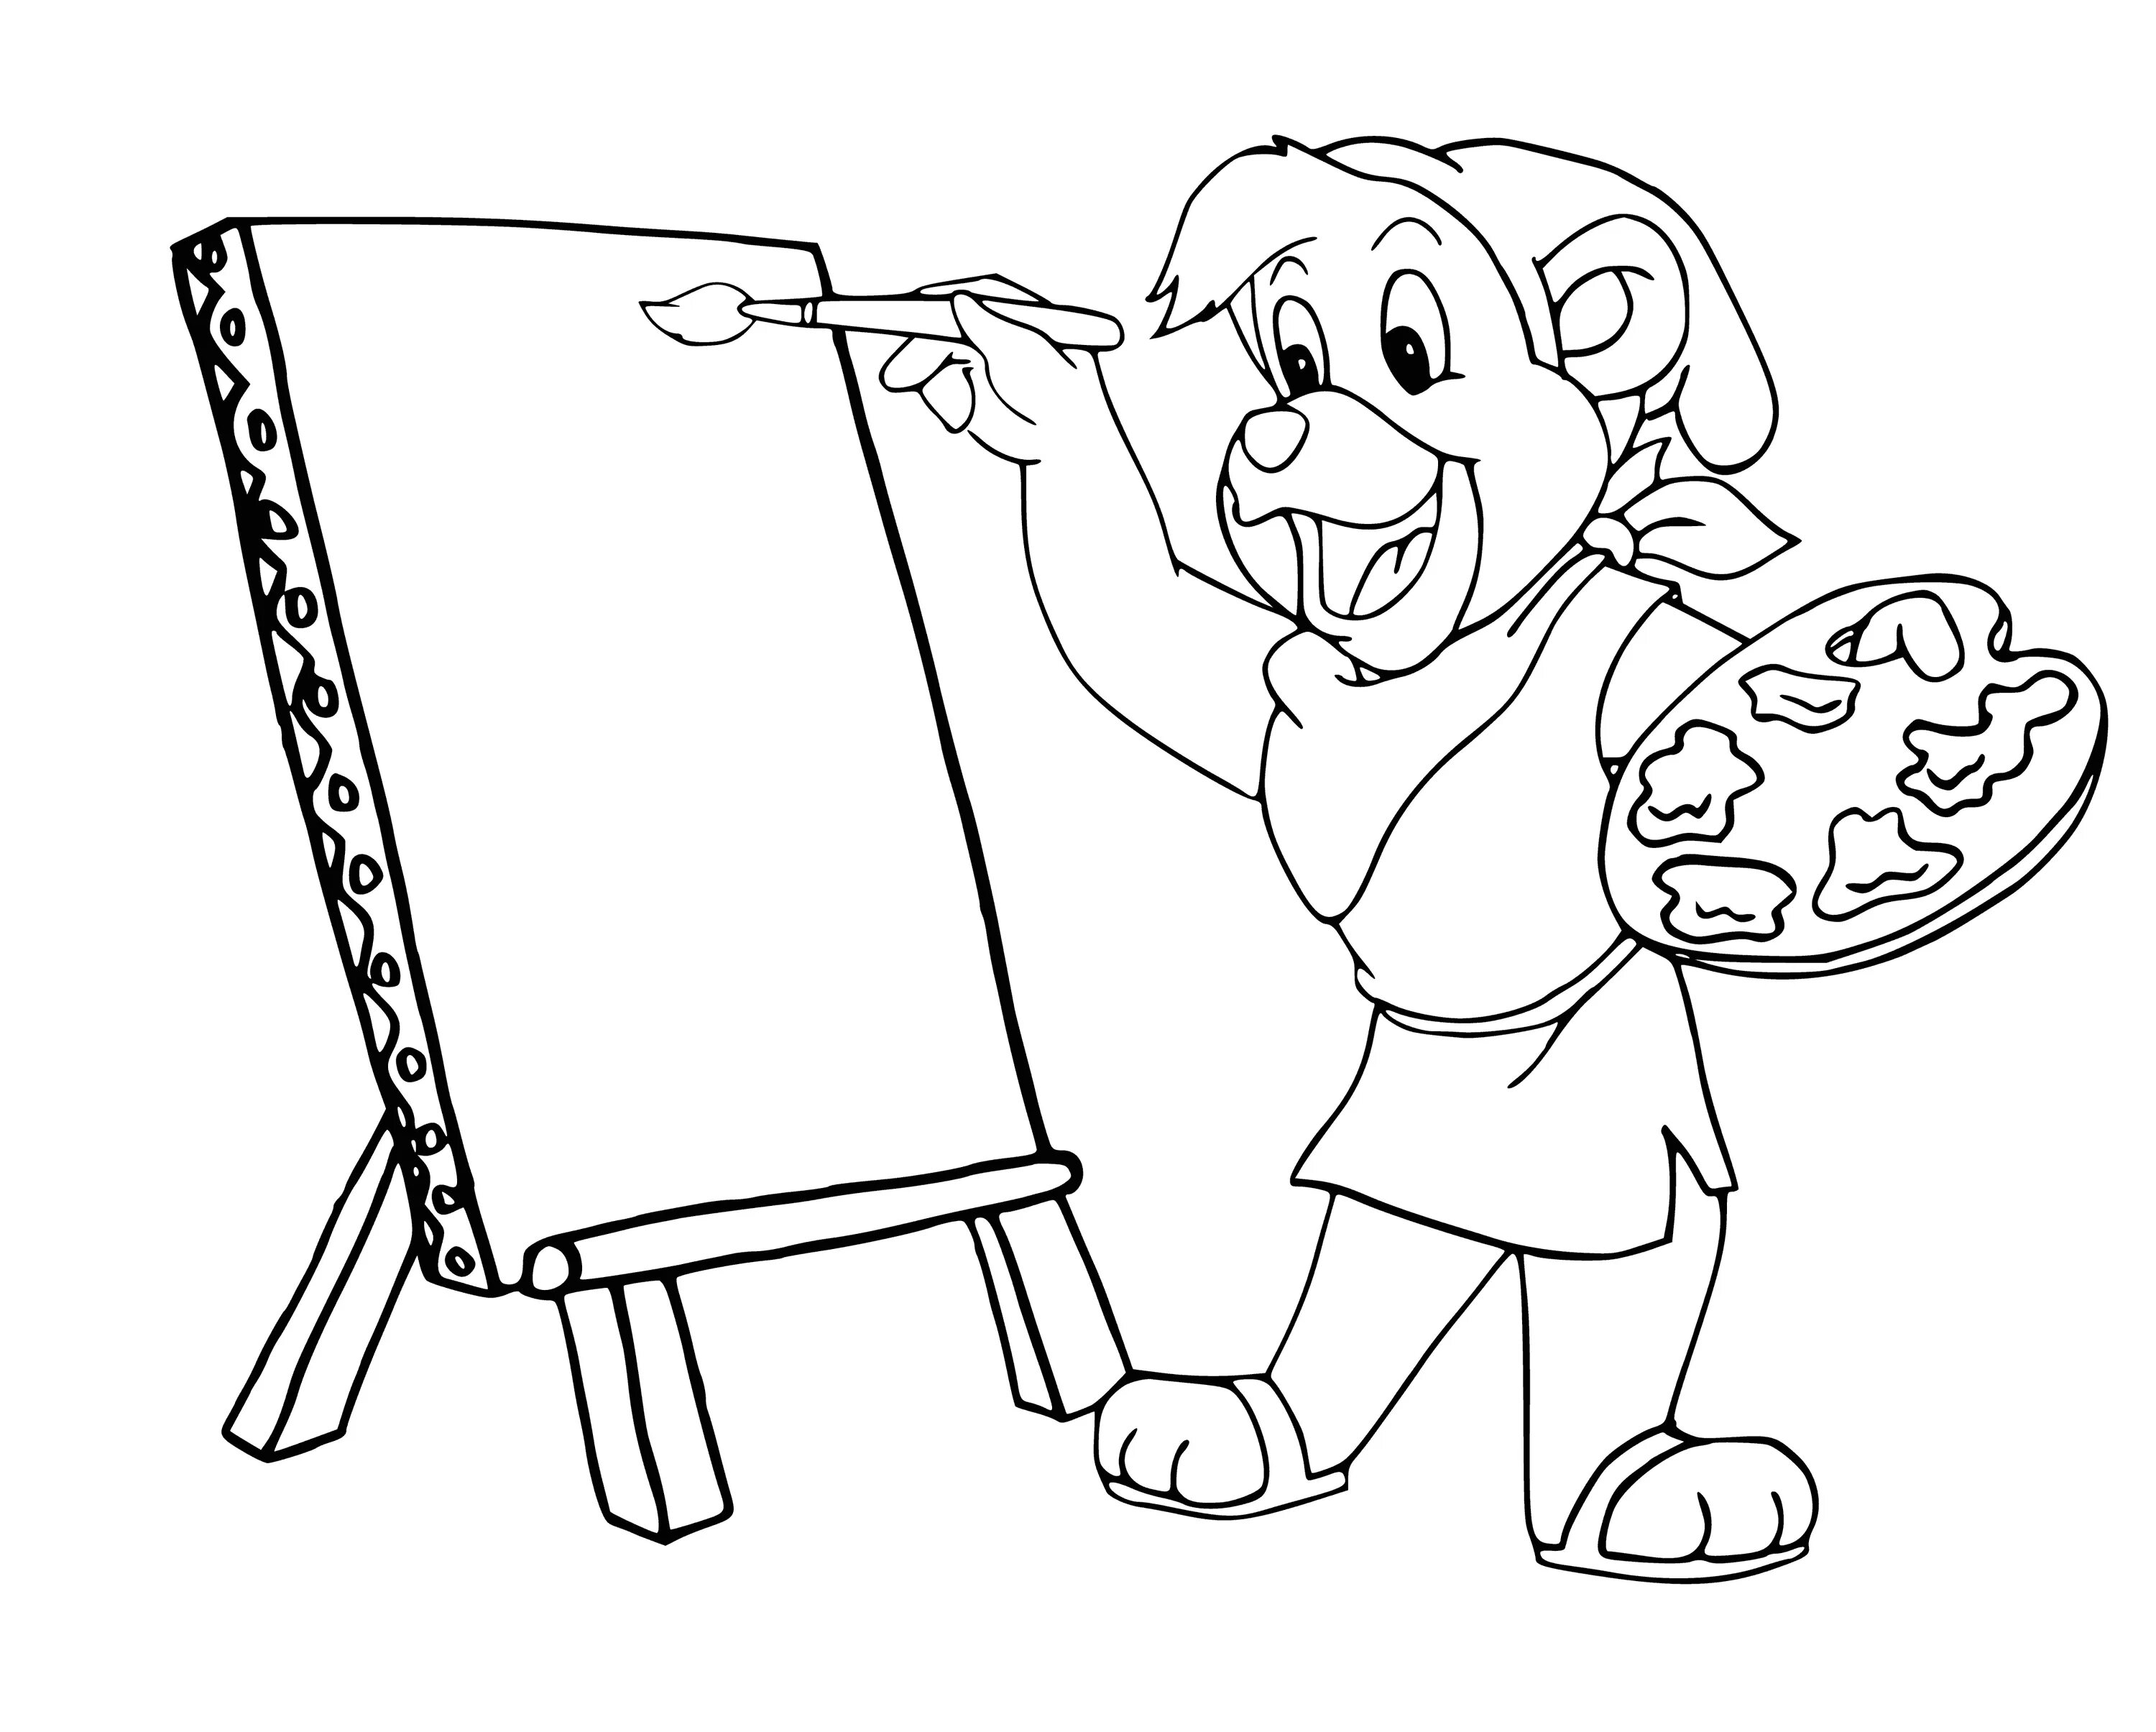 Colorful coloring artist for preschoolers